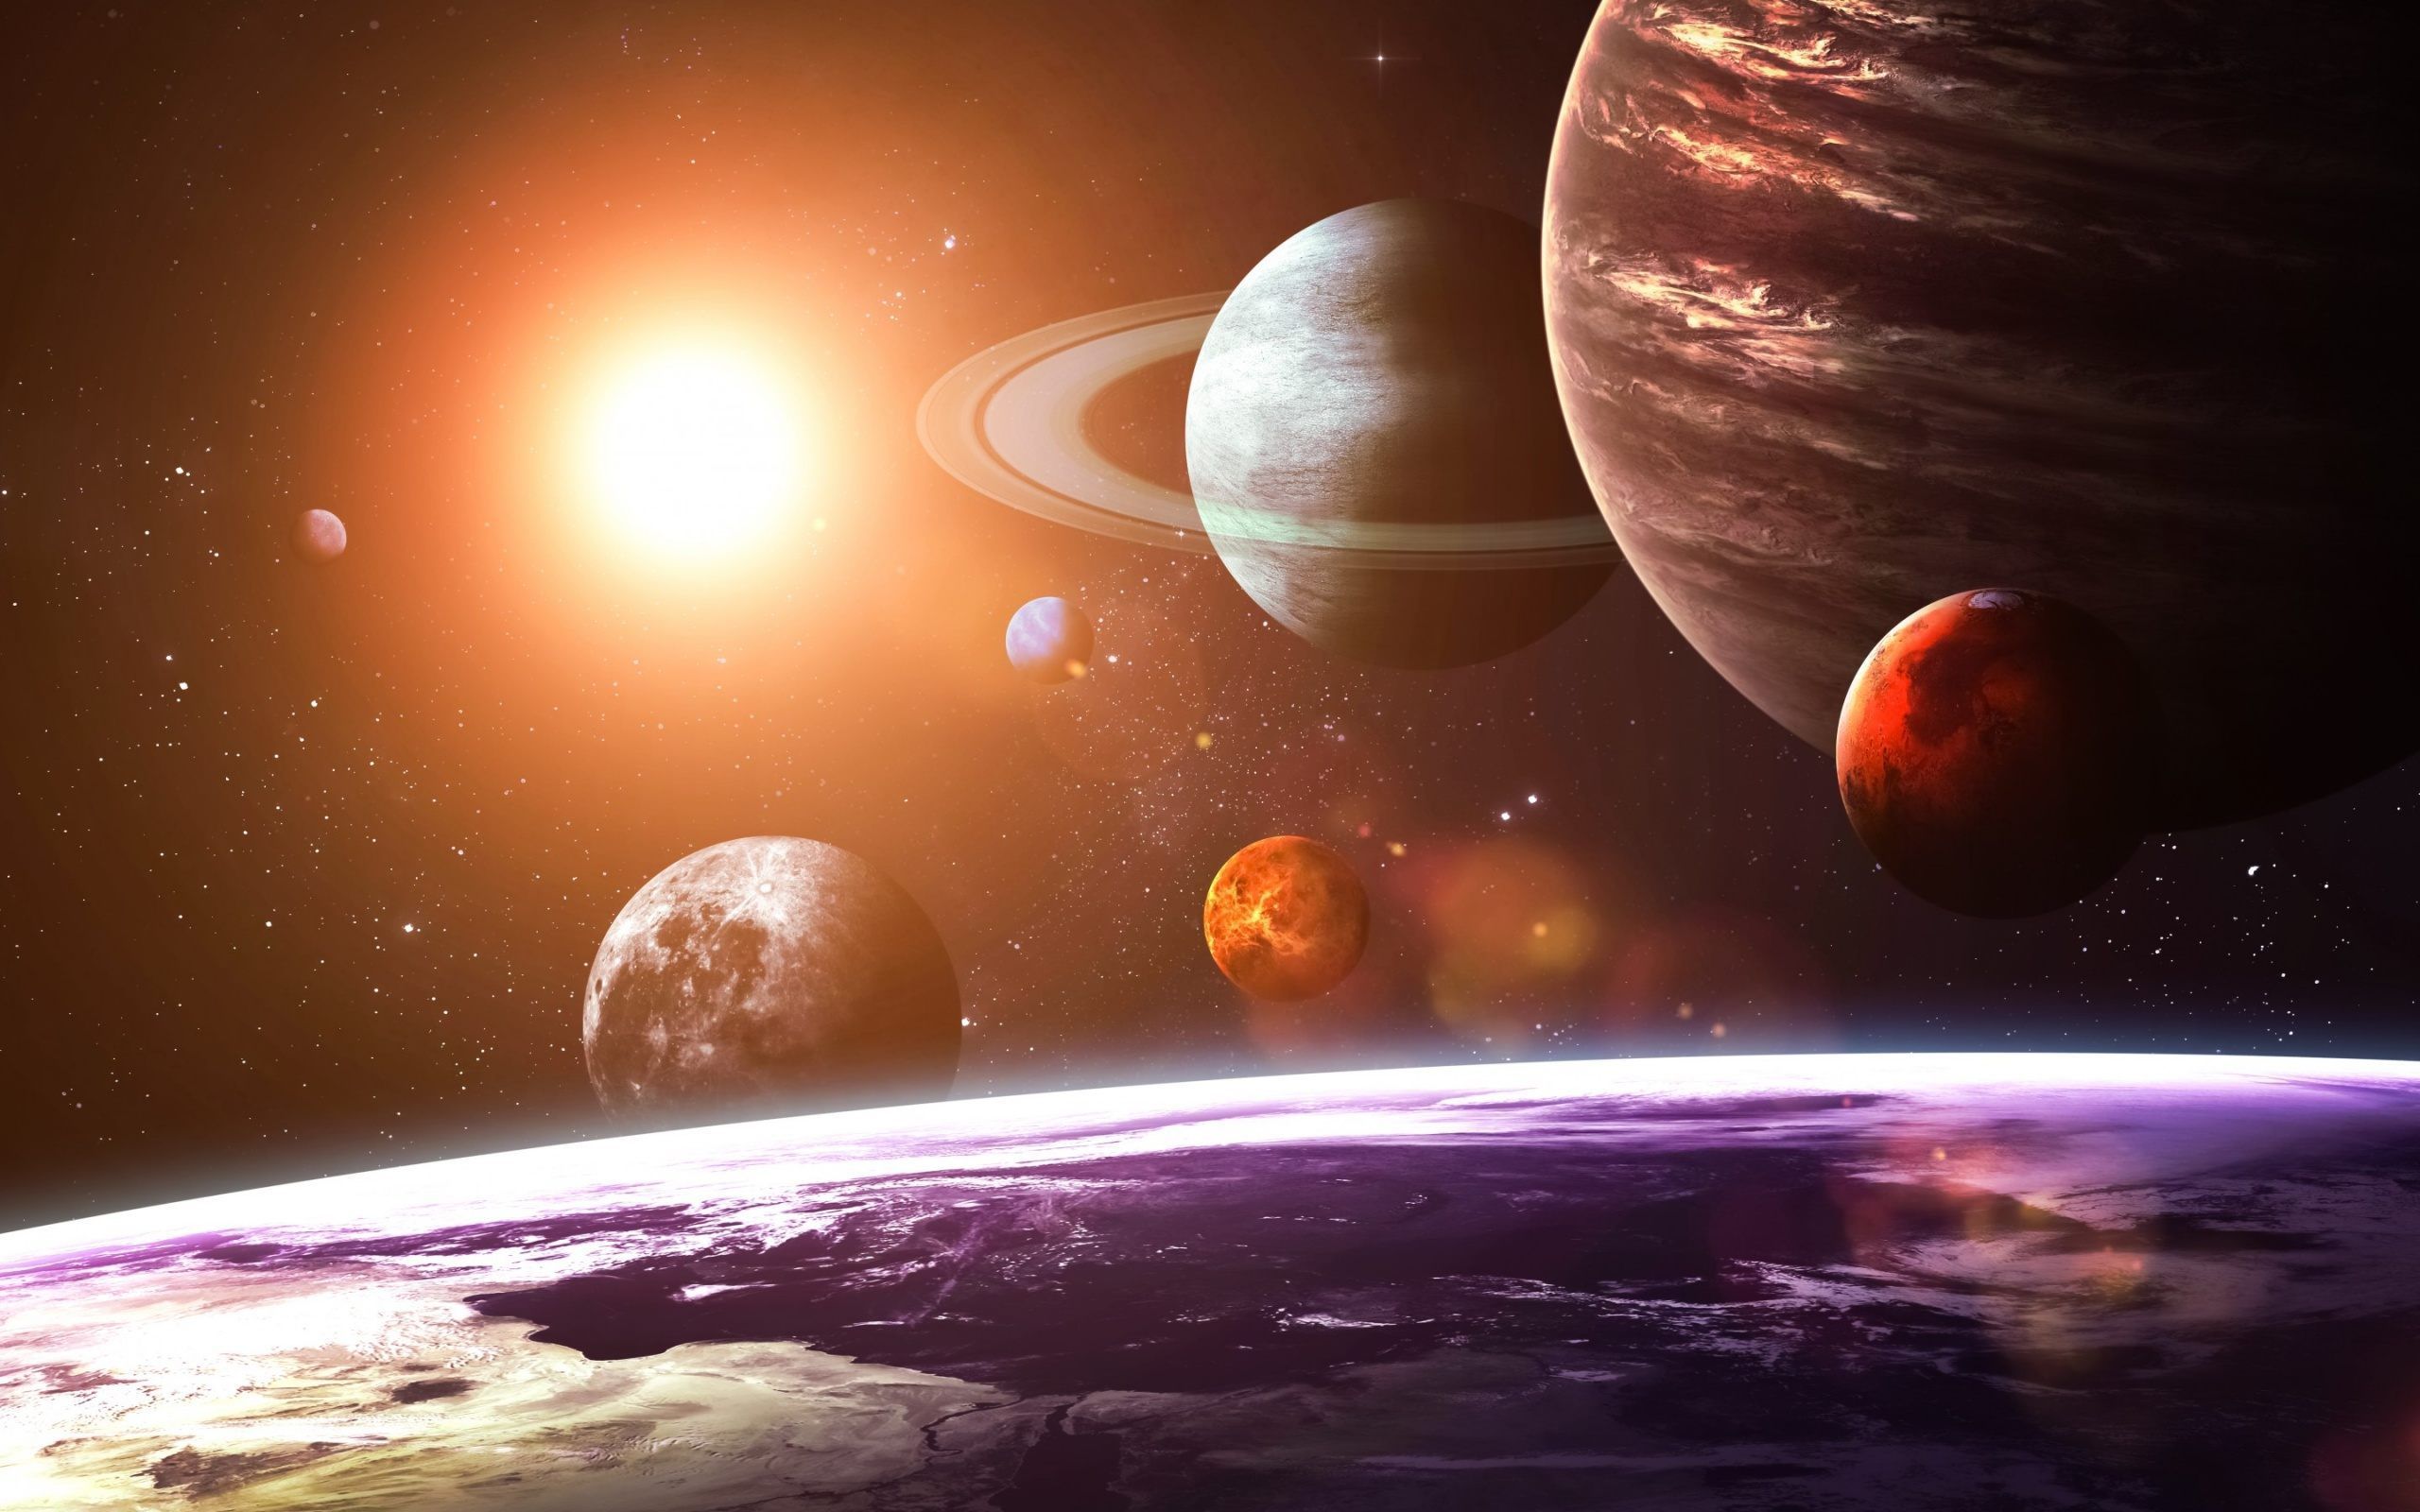 Solar System HD Wallpapers High Quality 